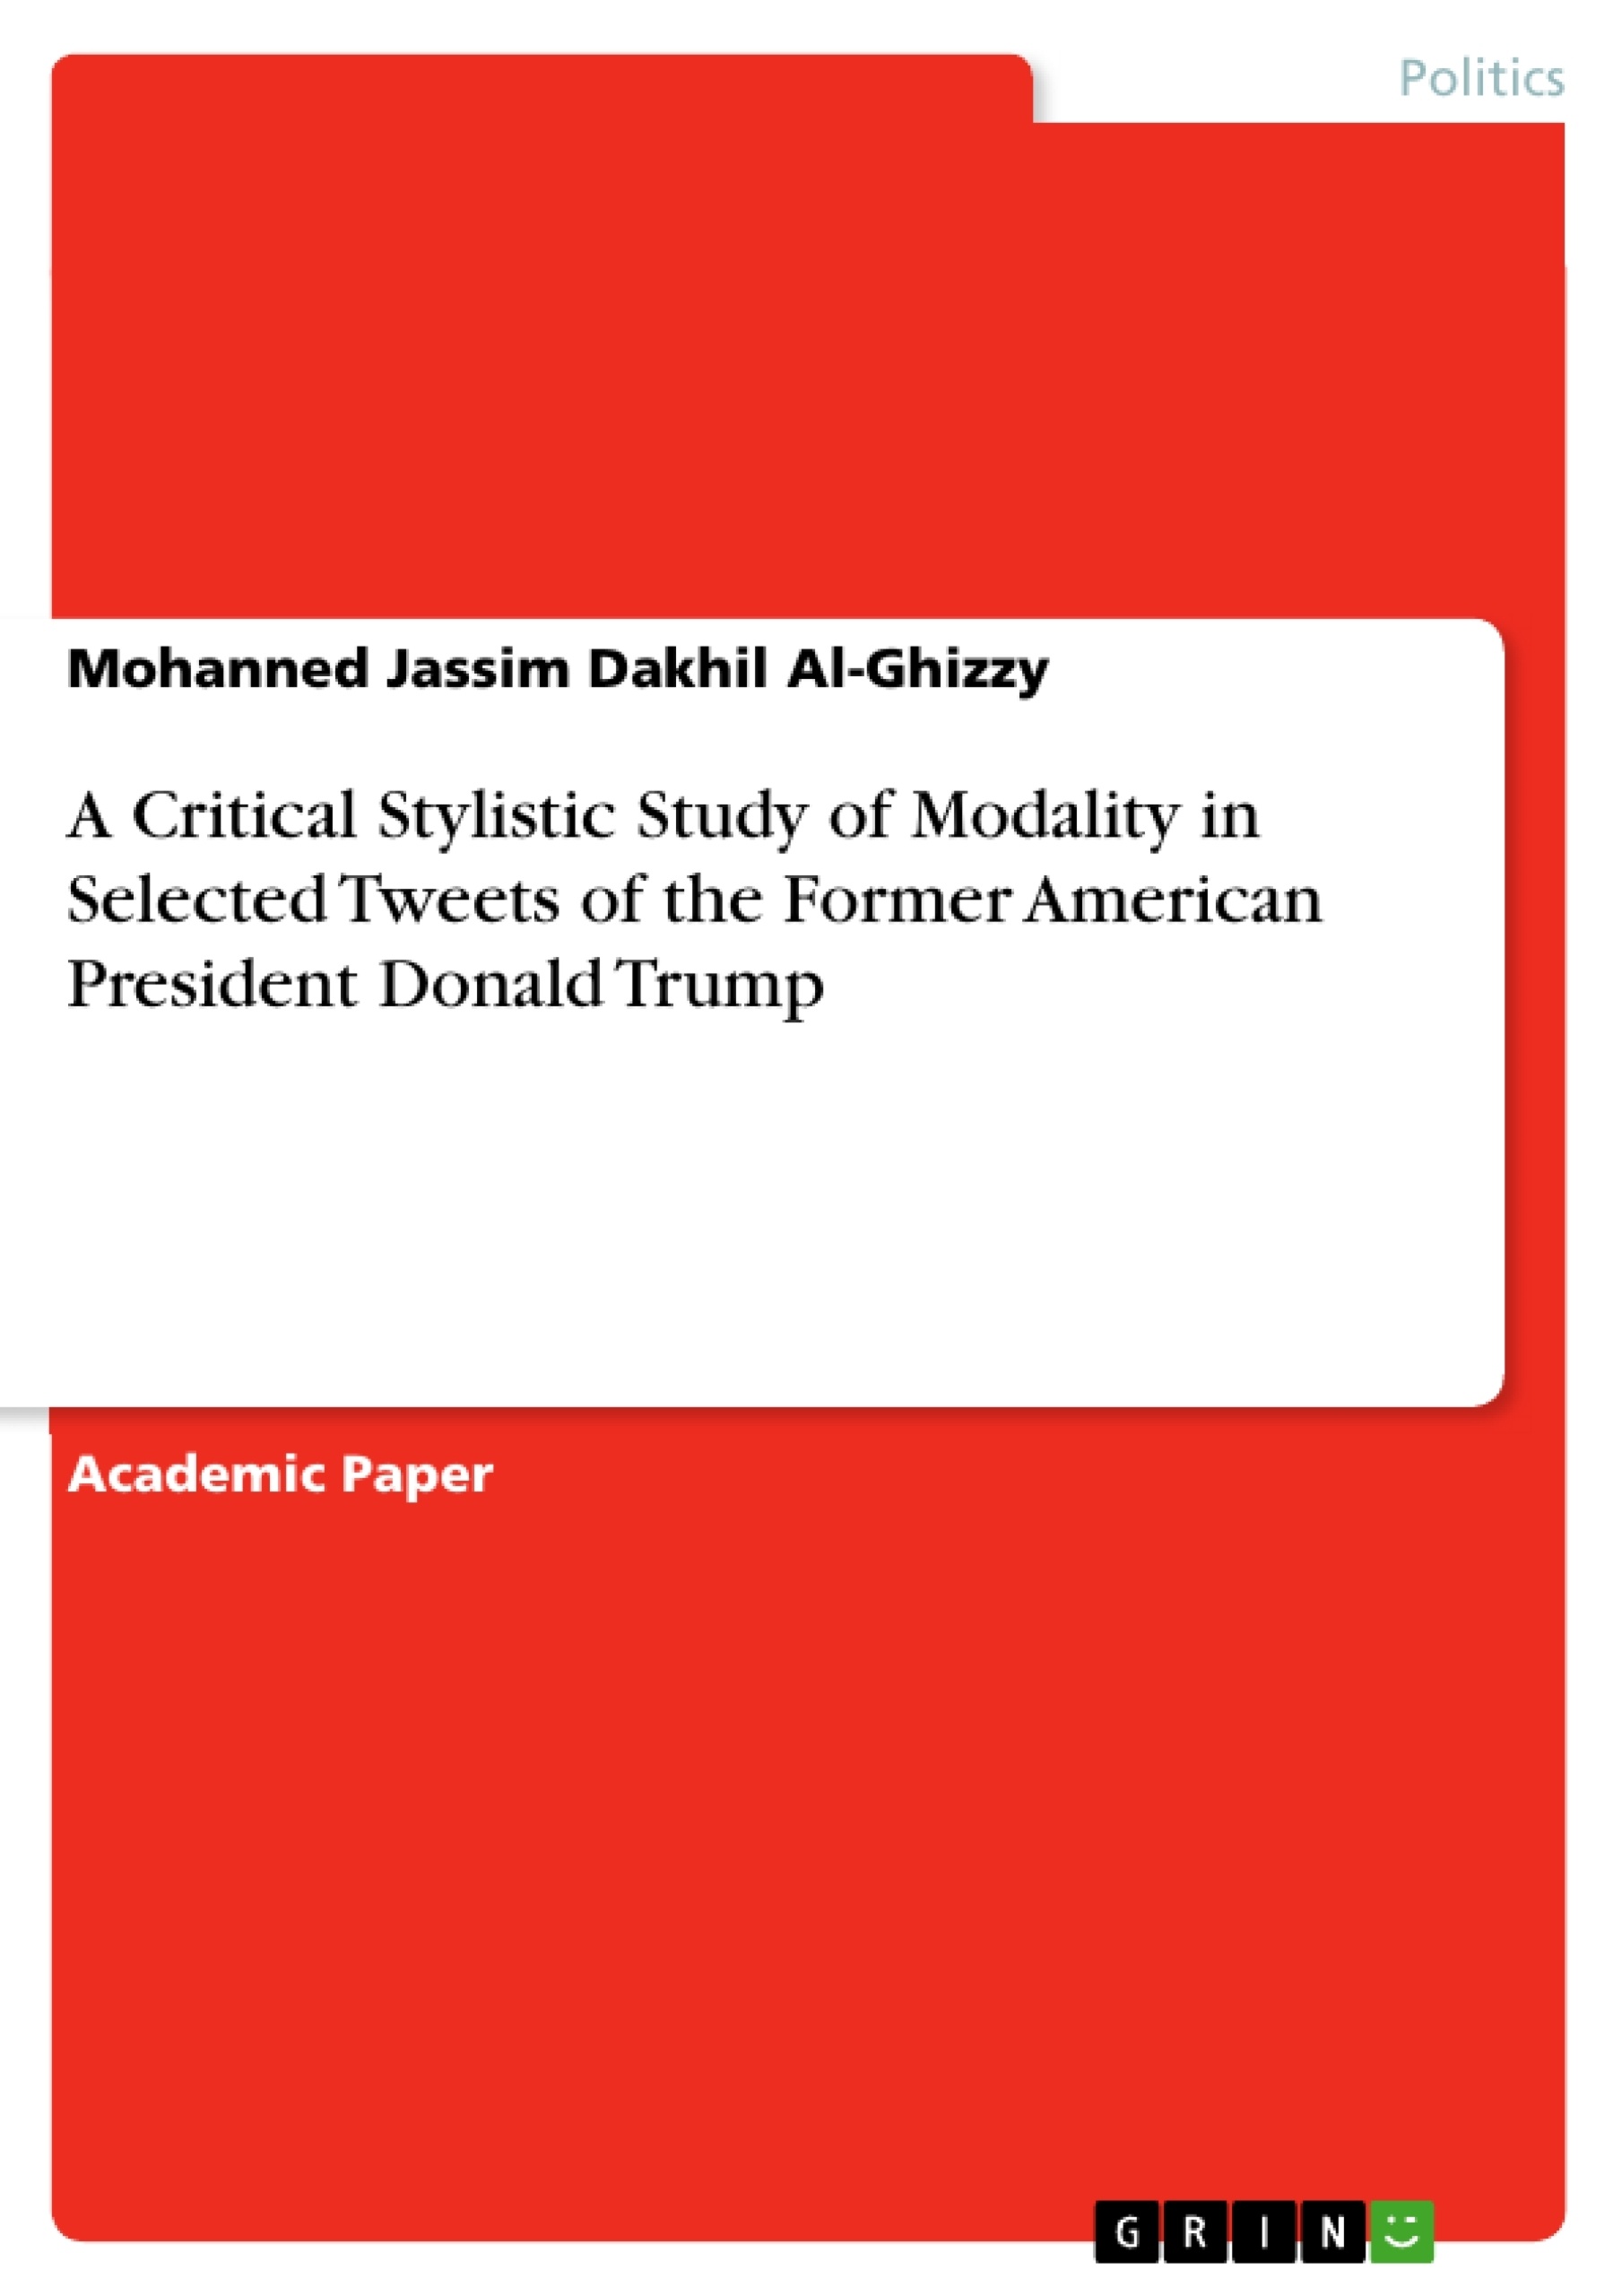 Title: A Critical Stylistic Study of Modality in Selected Tweets of the Former American President Donald Trump